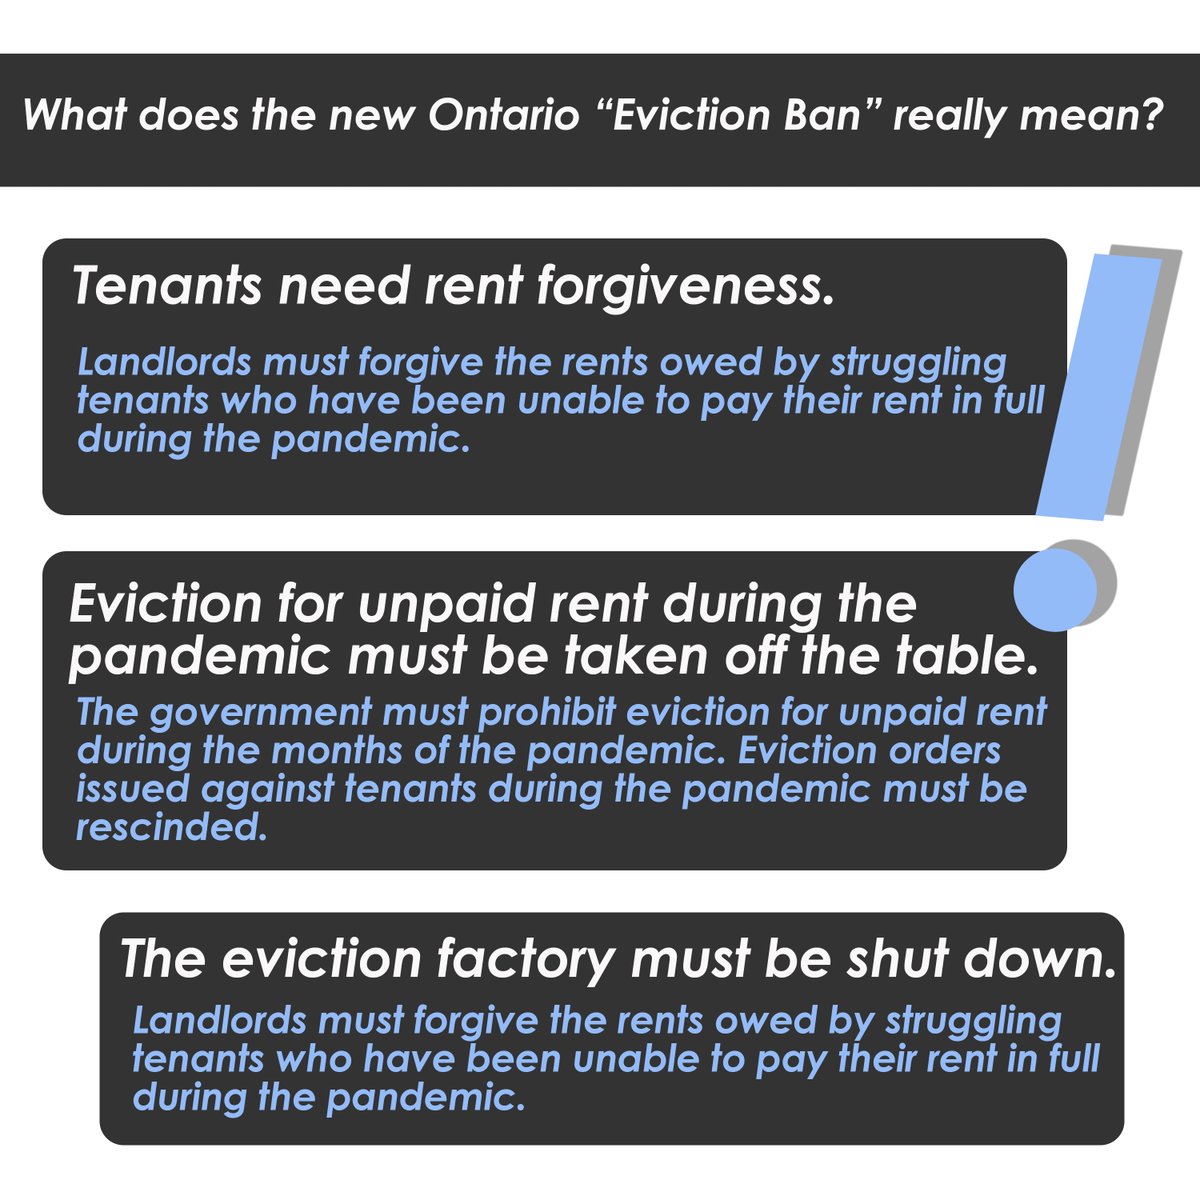 Tenants need rent forgiveness.Eviction for unpaid rent during the pandemic must be taken off the table.The eviction factory at the Landlord Tenant Board must be shut down.